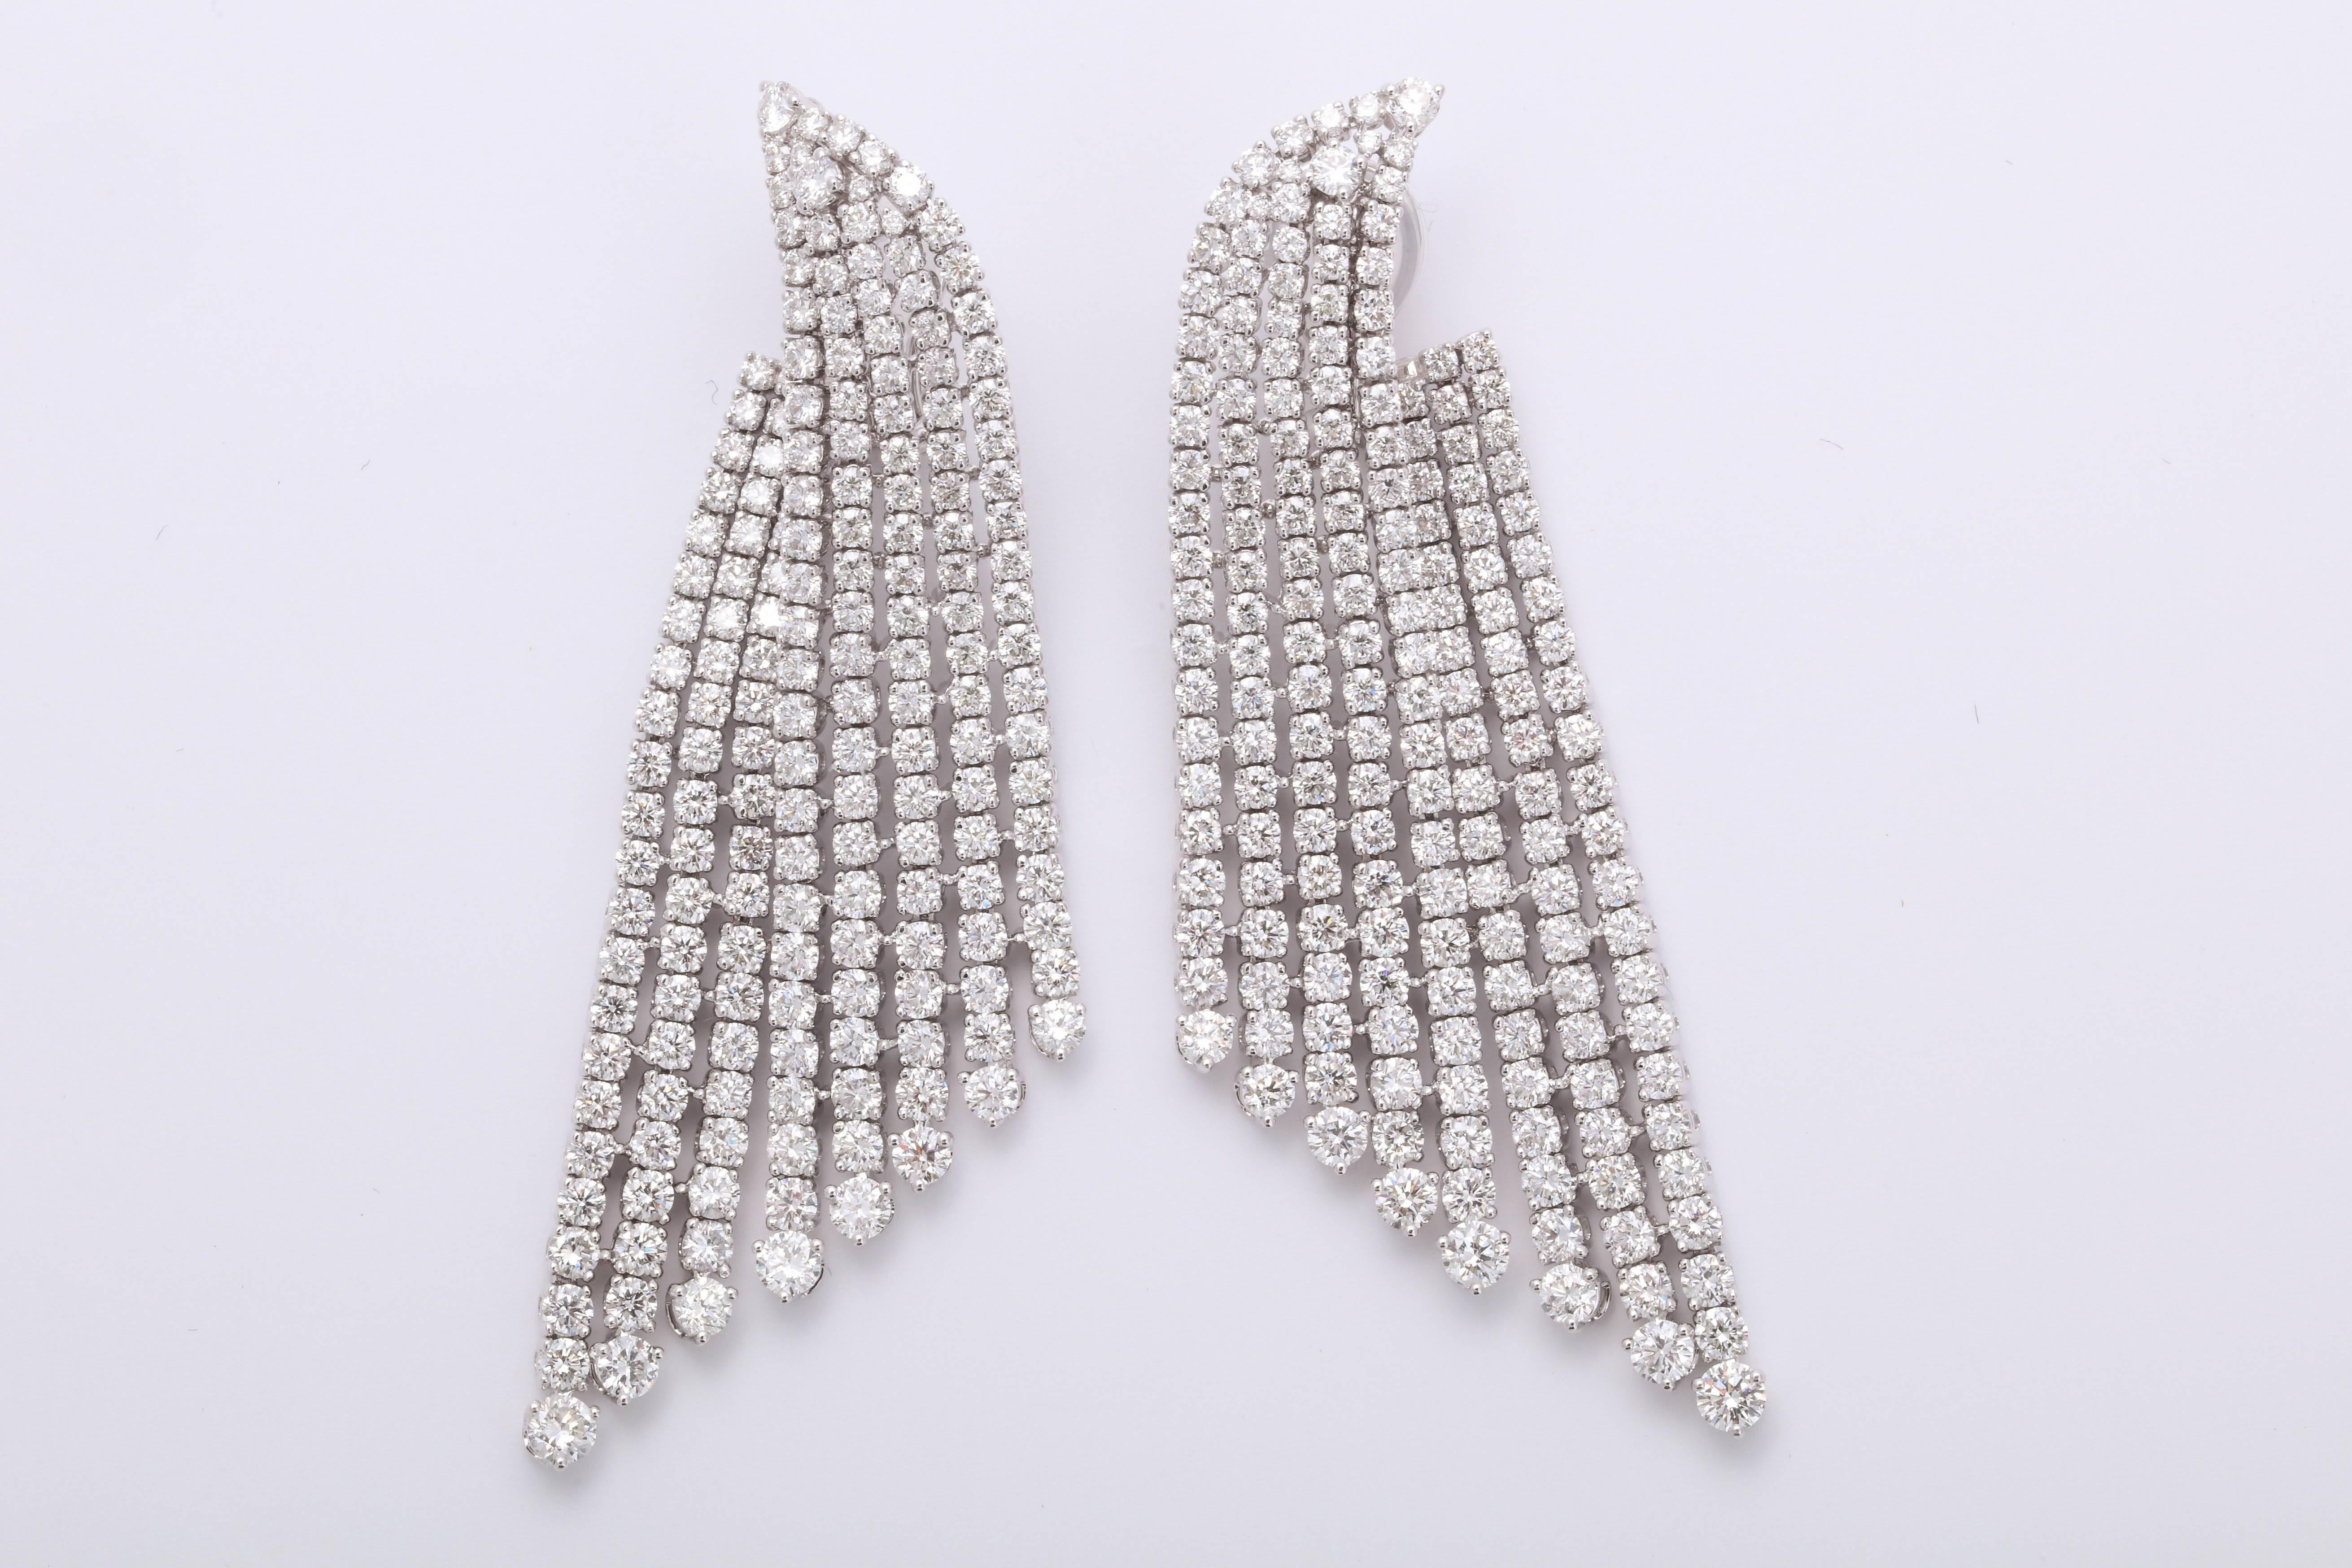 
A gorgeous and grand pair of diamond earrings. 

20.80 carats of white round brilliant cut diamonds set in 18k white gold 

Just under 3 inches long from the highest to lowest point, a little over an inch at its widest point. 

The diamonds are set